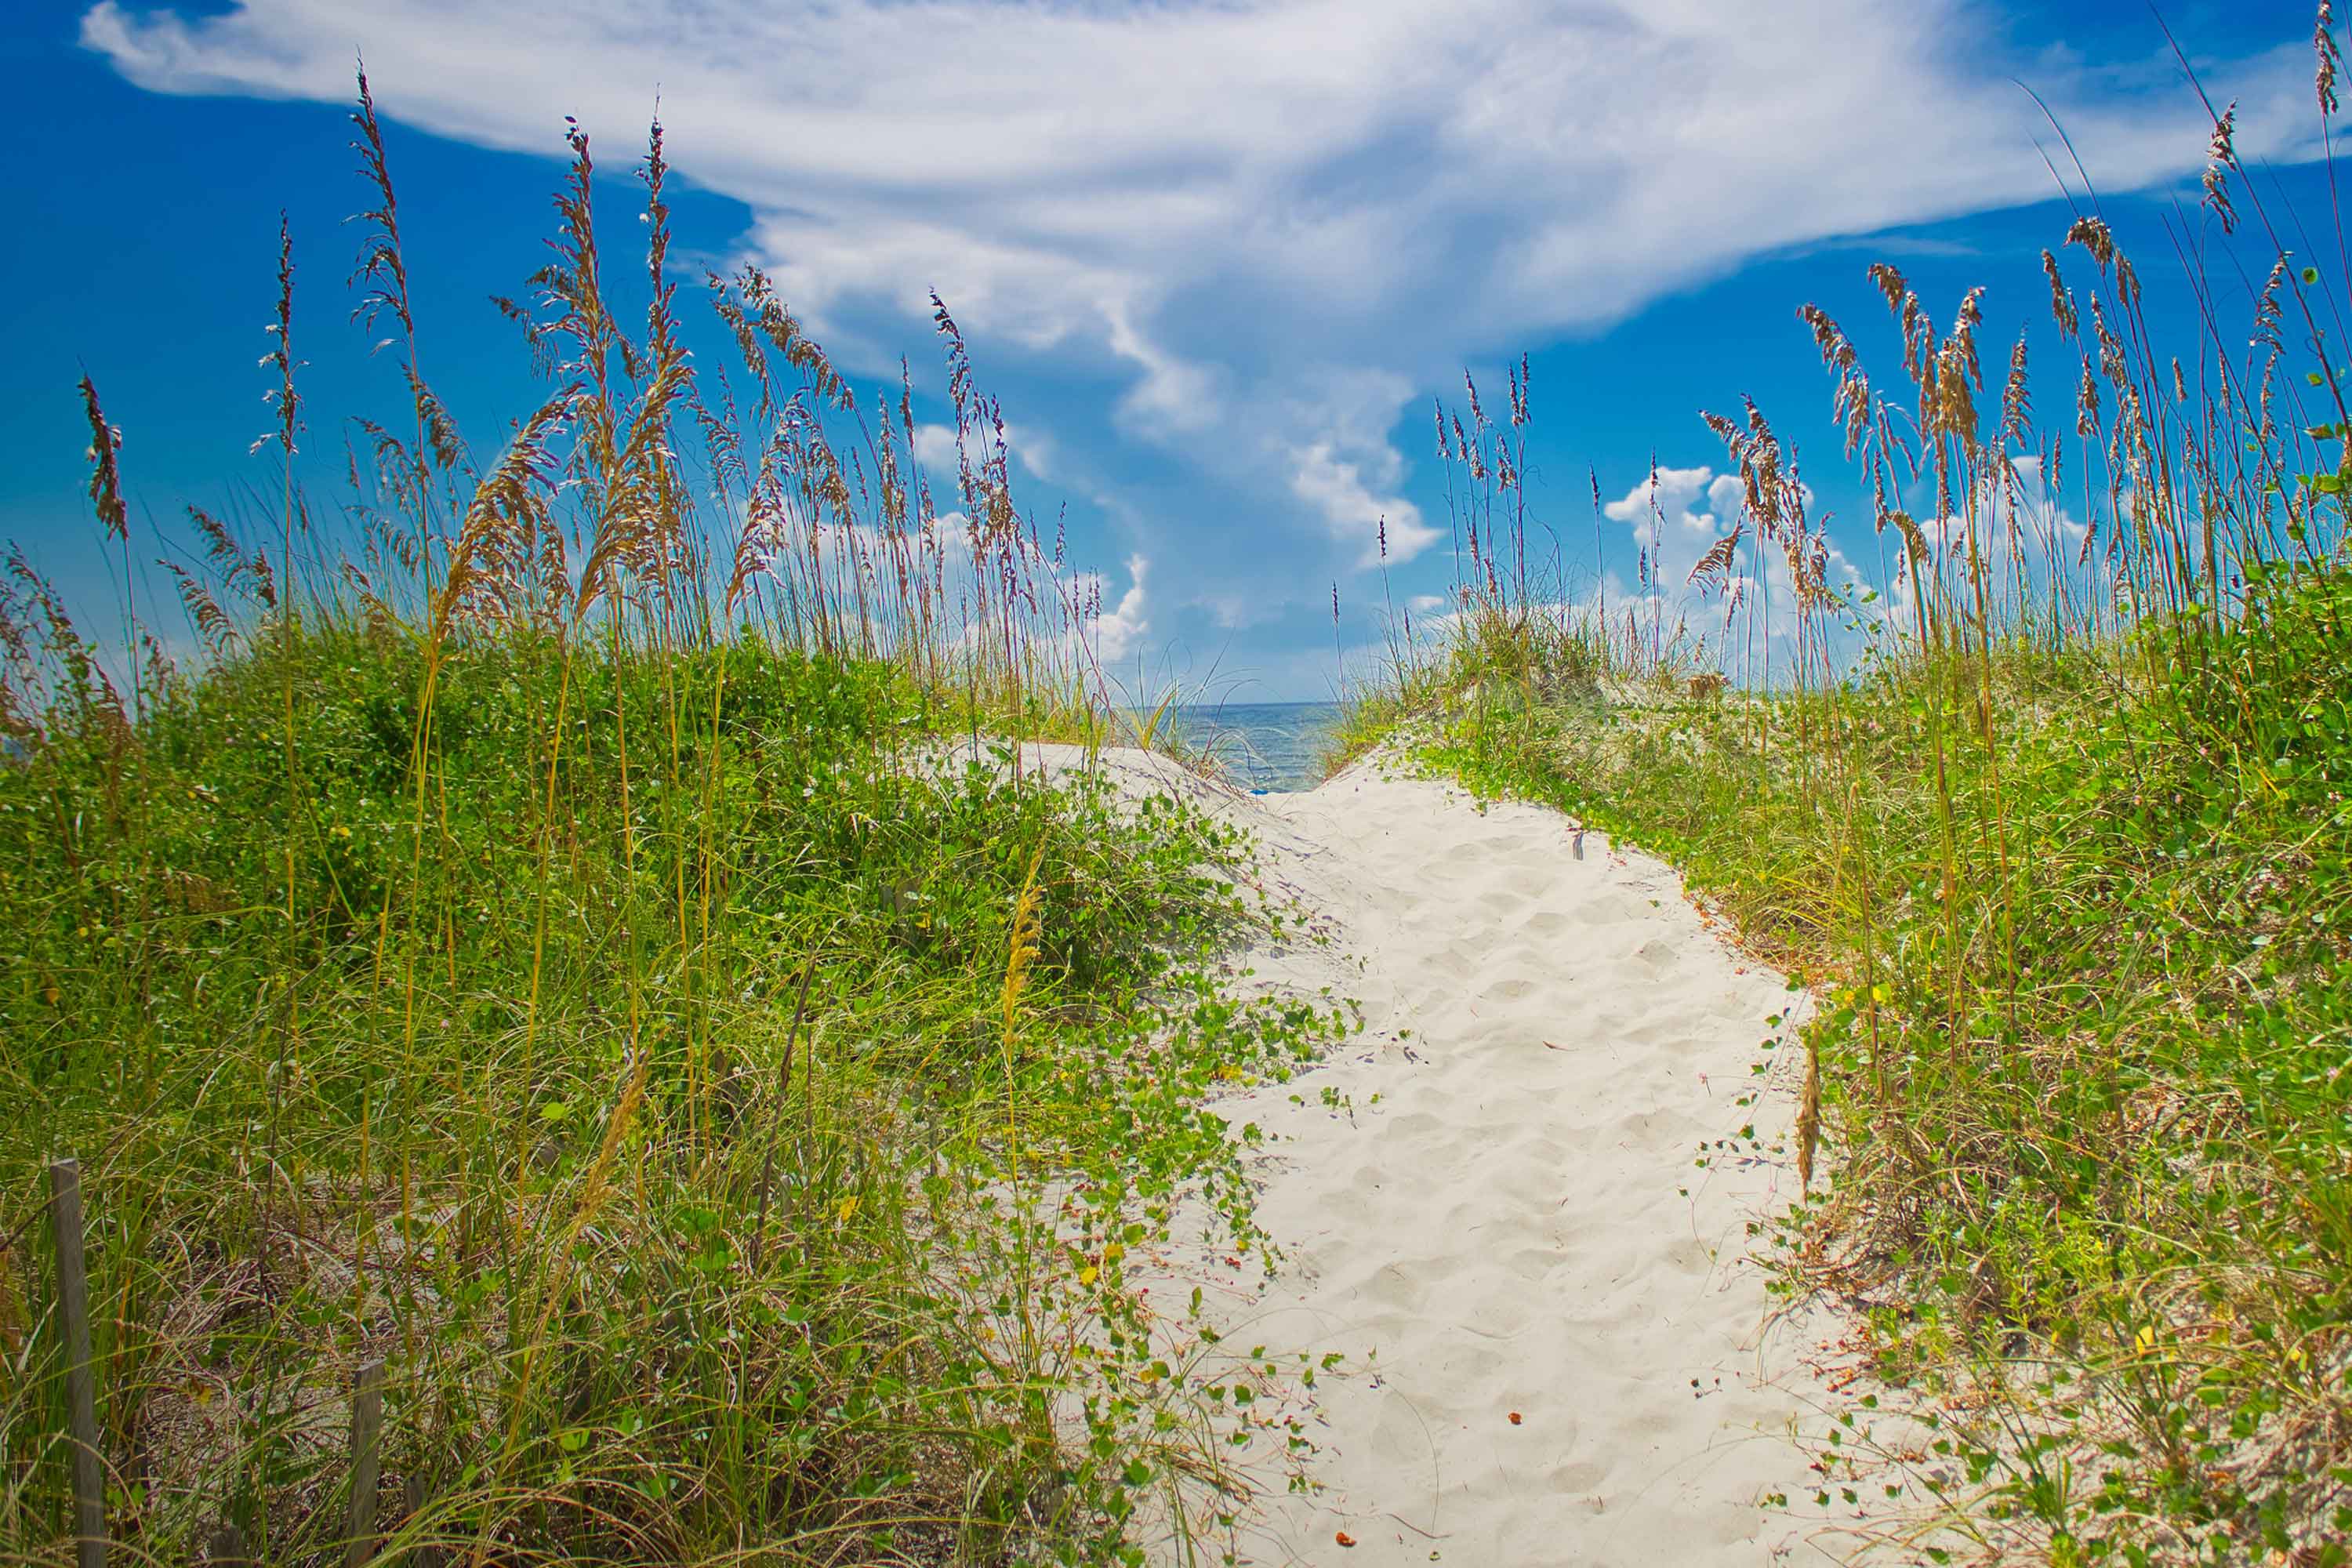 Sandy Dunes in the South Eastern United States